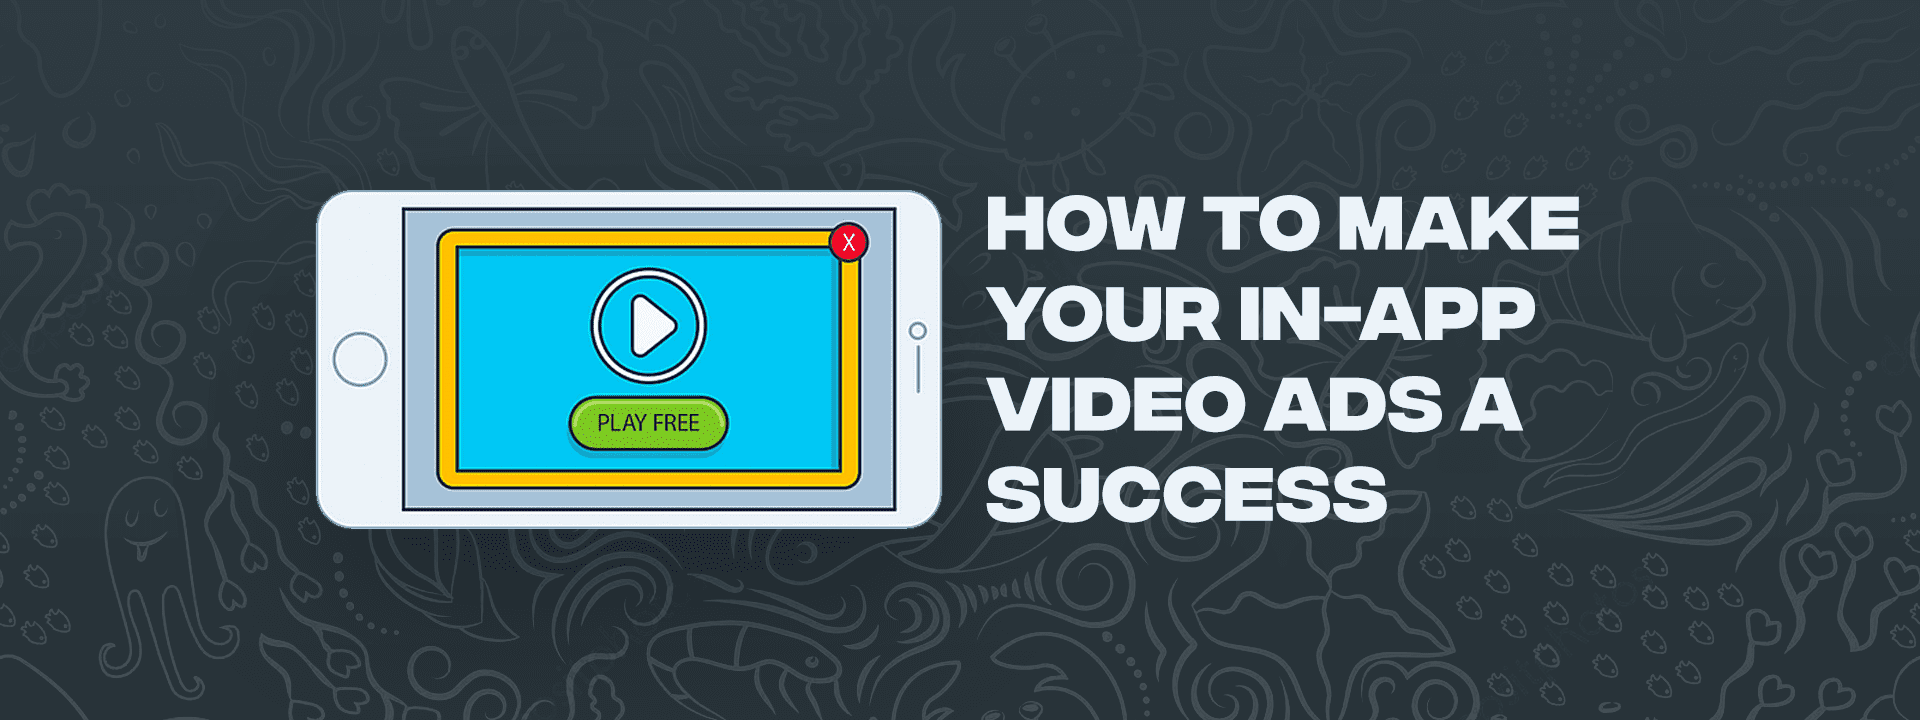 make your In-App video ads a success